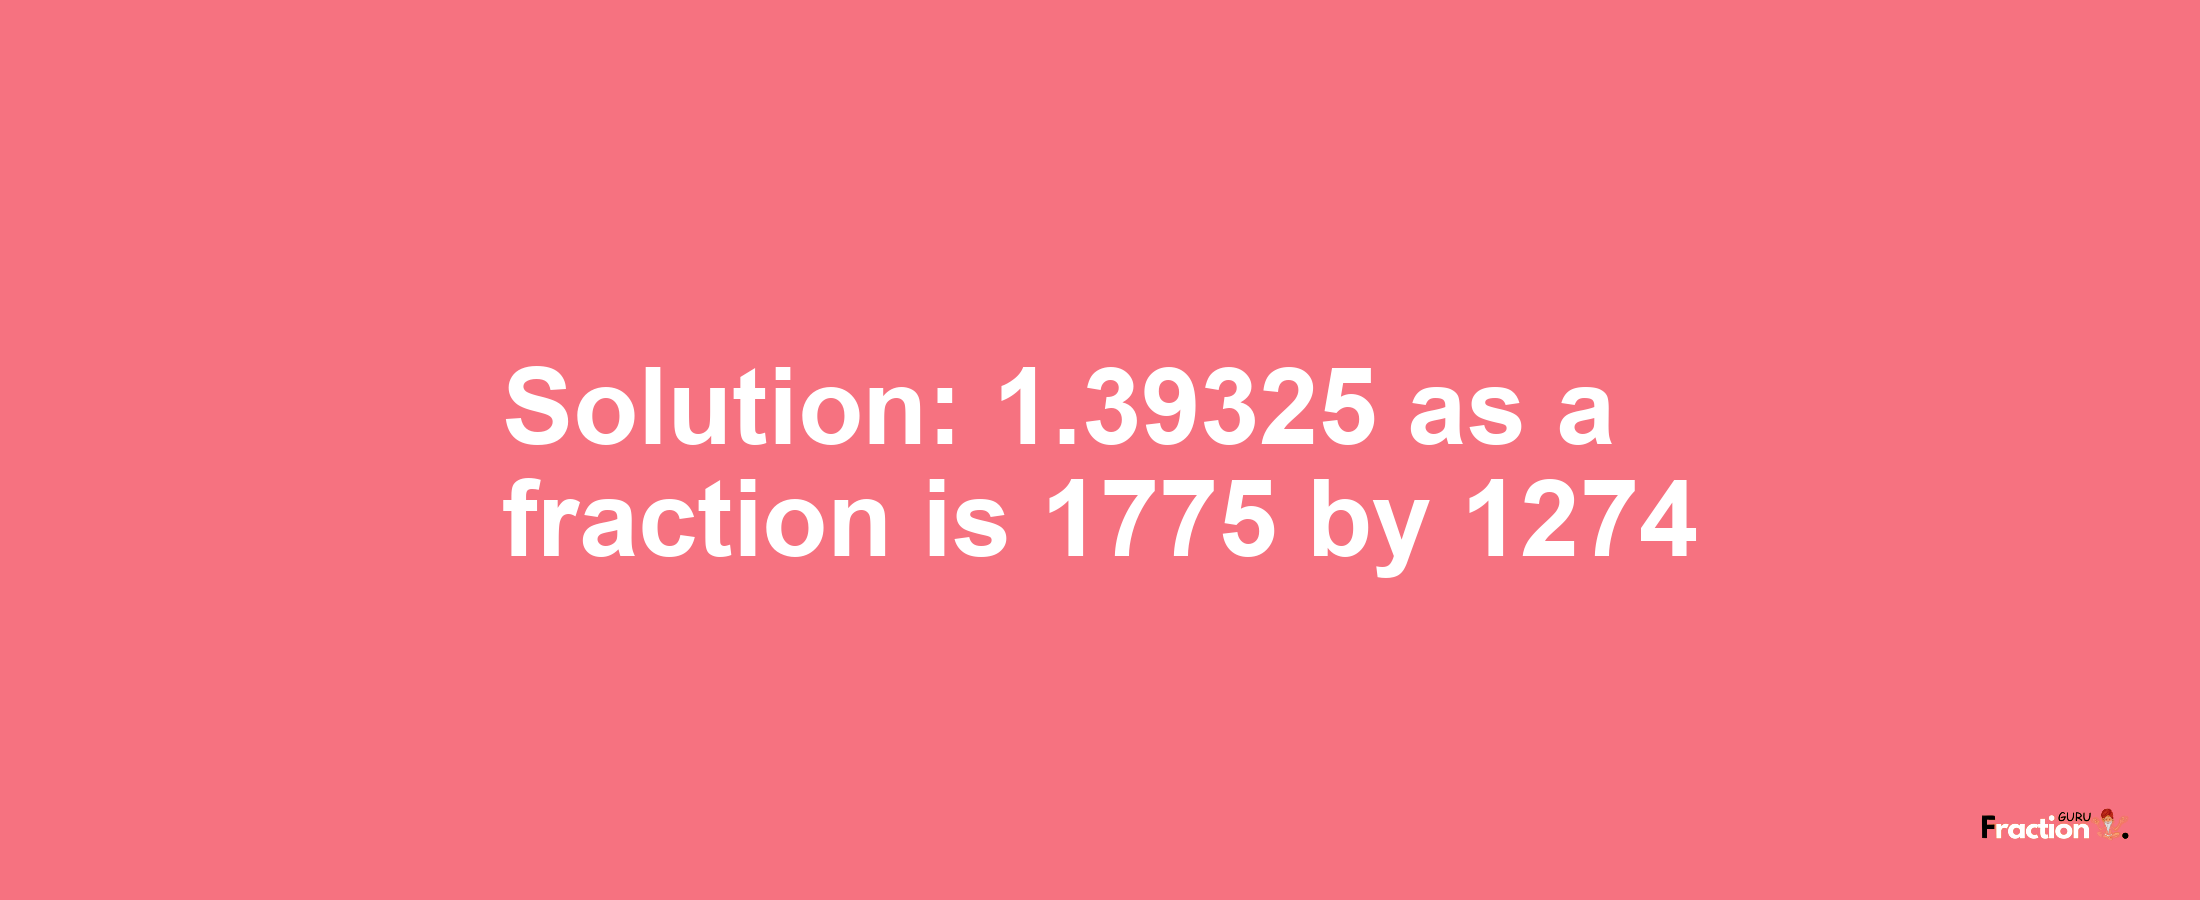 Solution:1.39325 as a fraction is 1775/1274